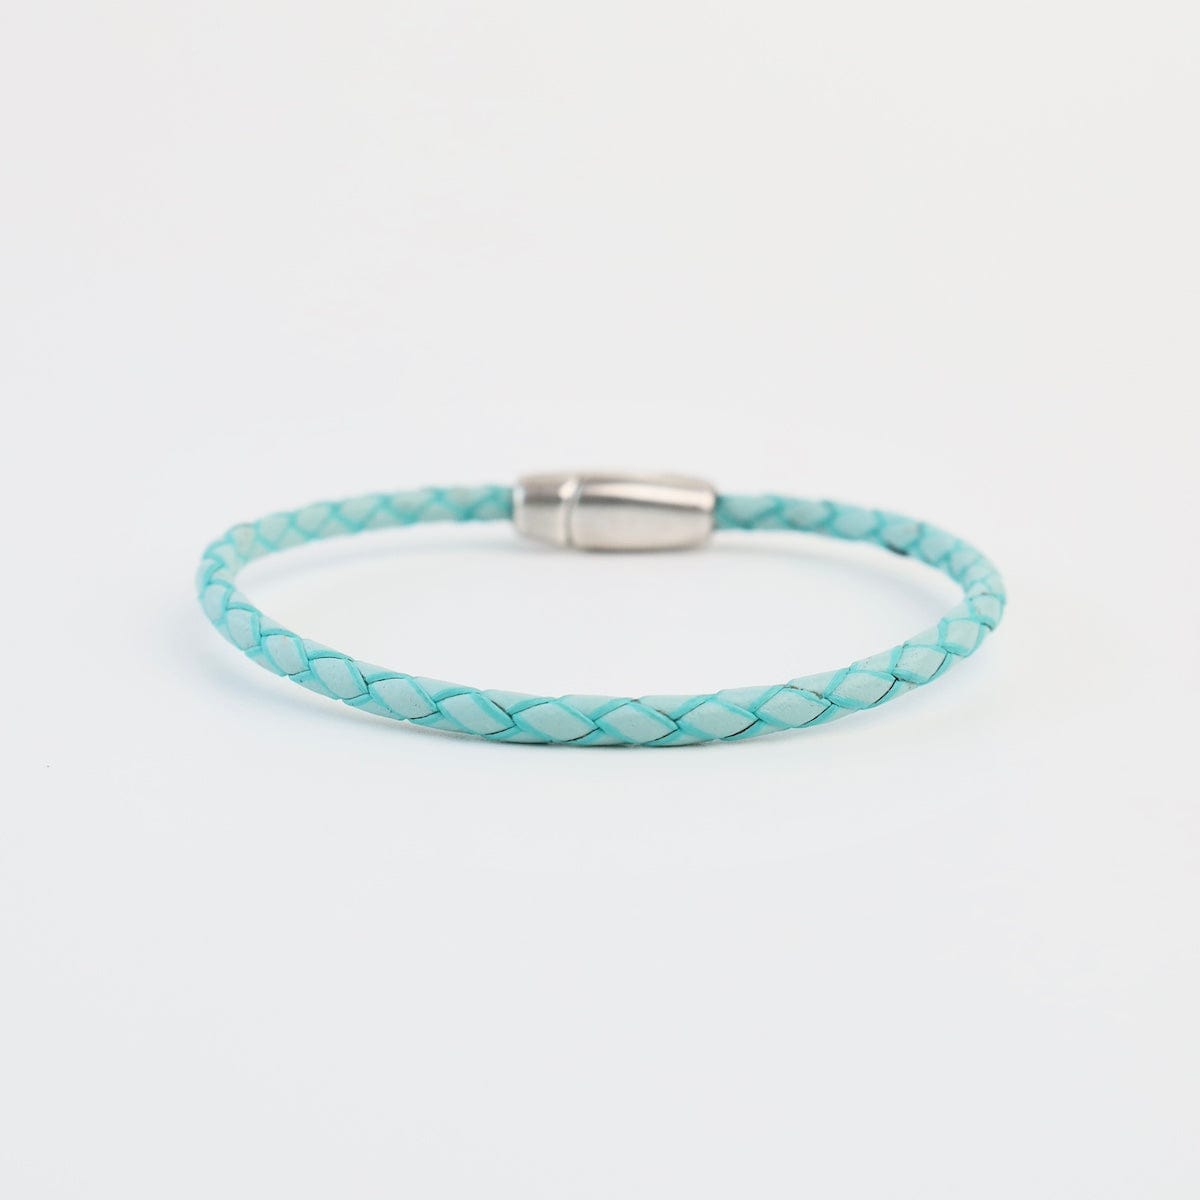 BRC Zoe Braided Turquoise Leather Bracelet - approx 7.